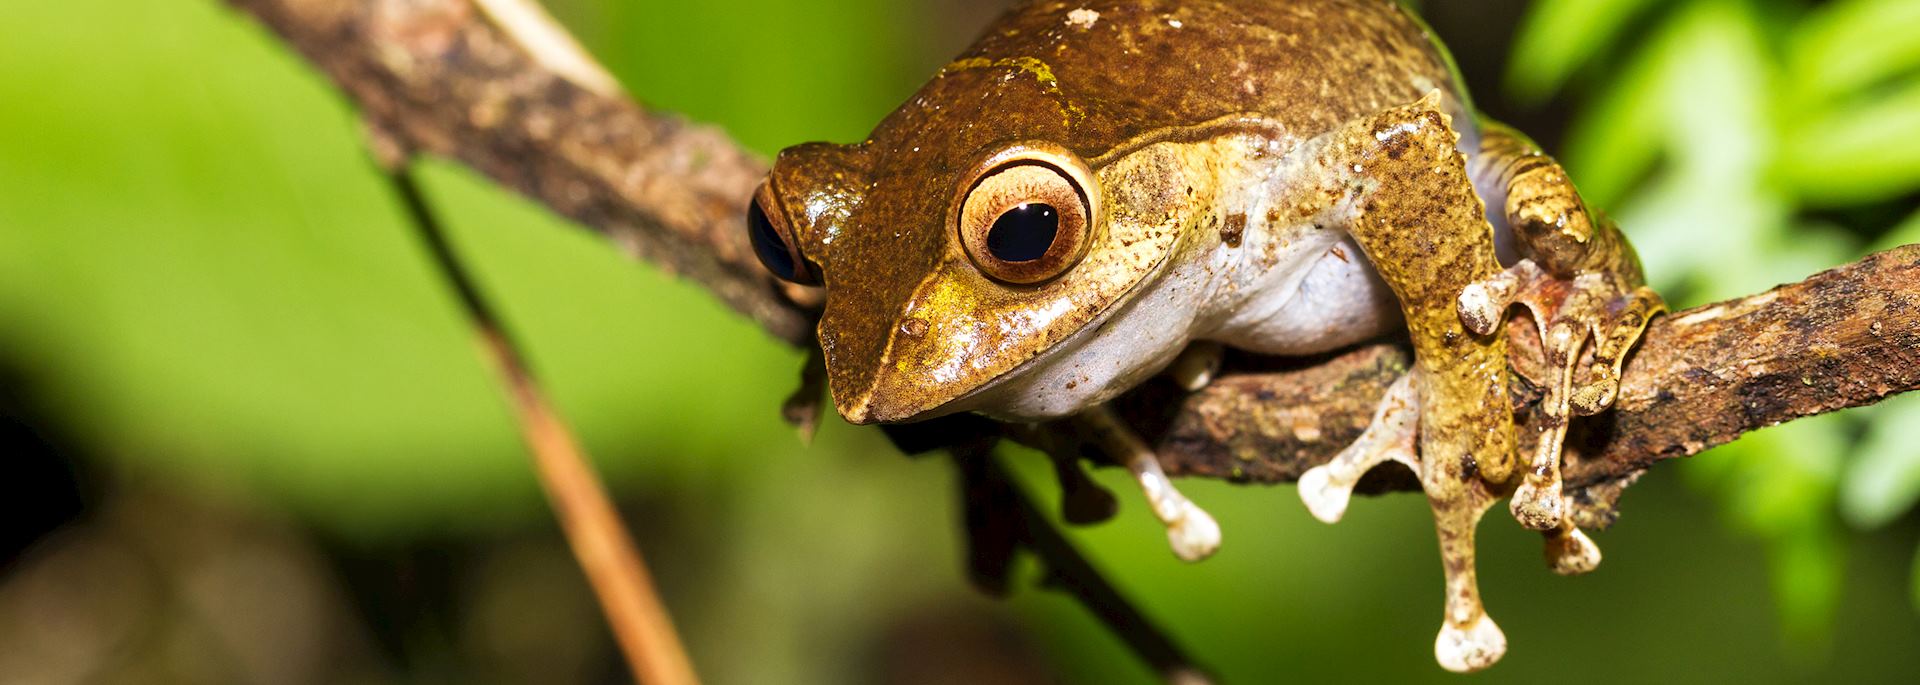 One of the many species of tree frog in Madagascar